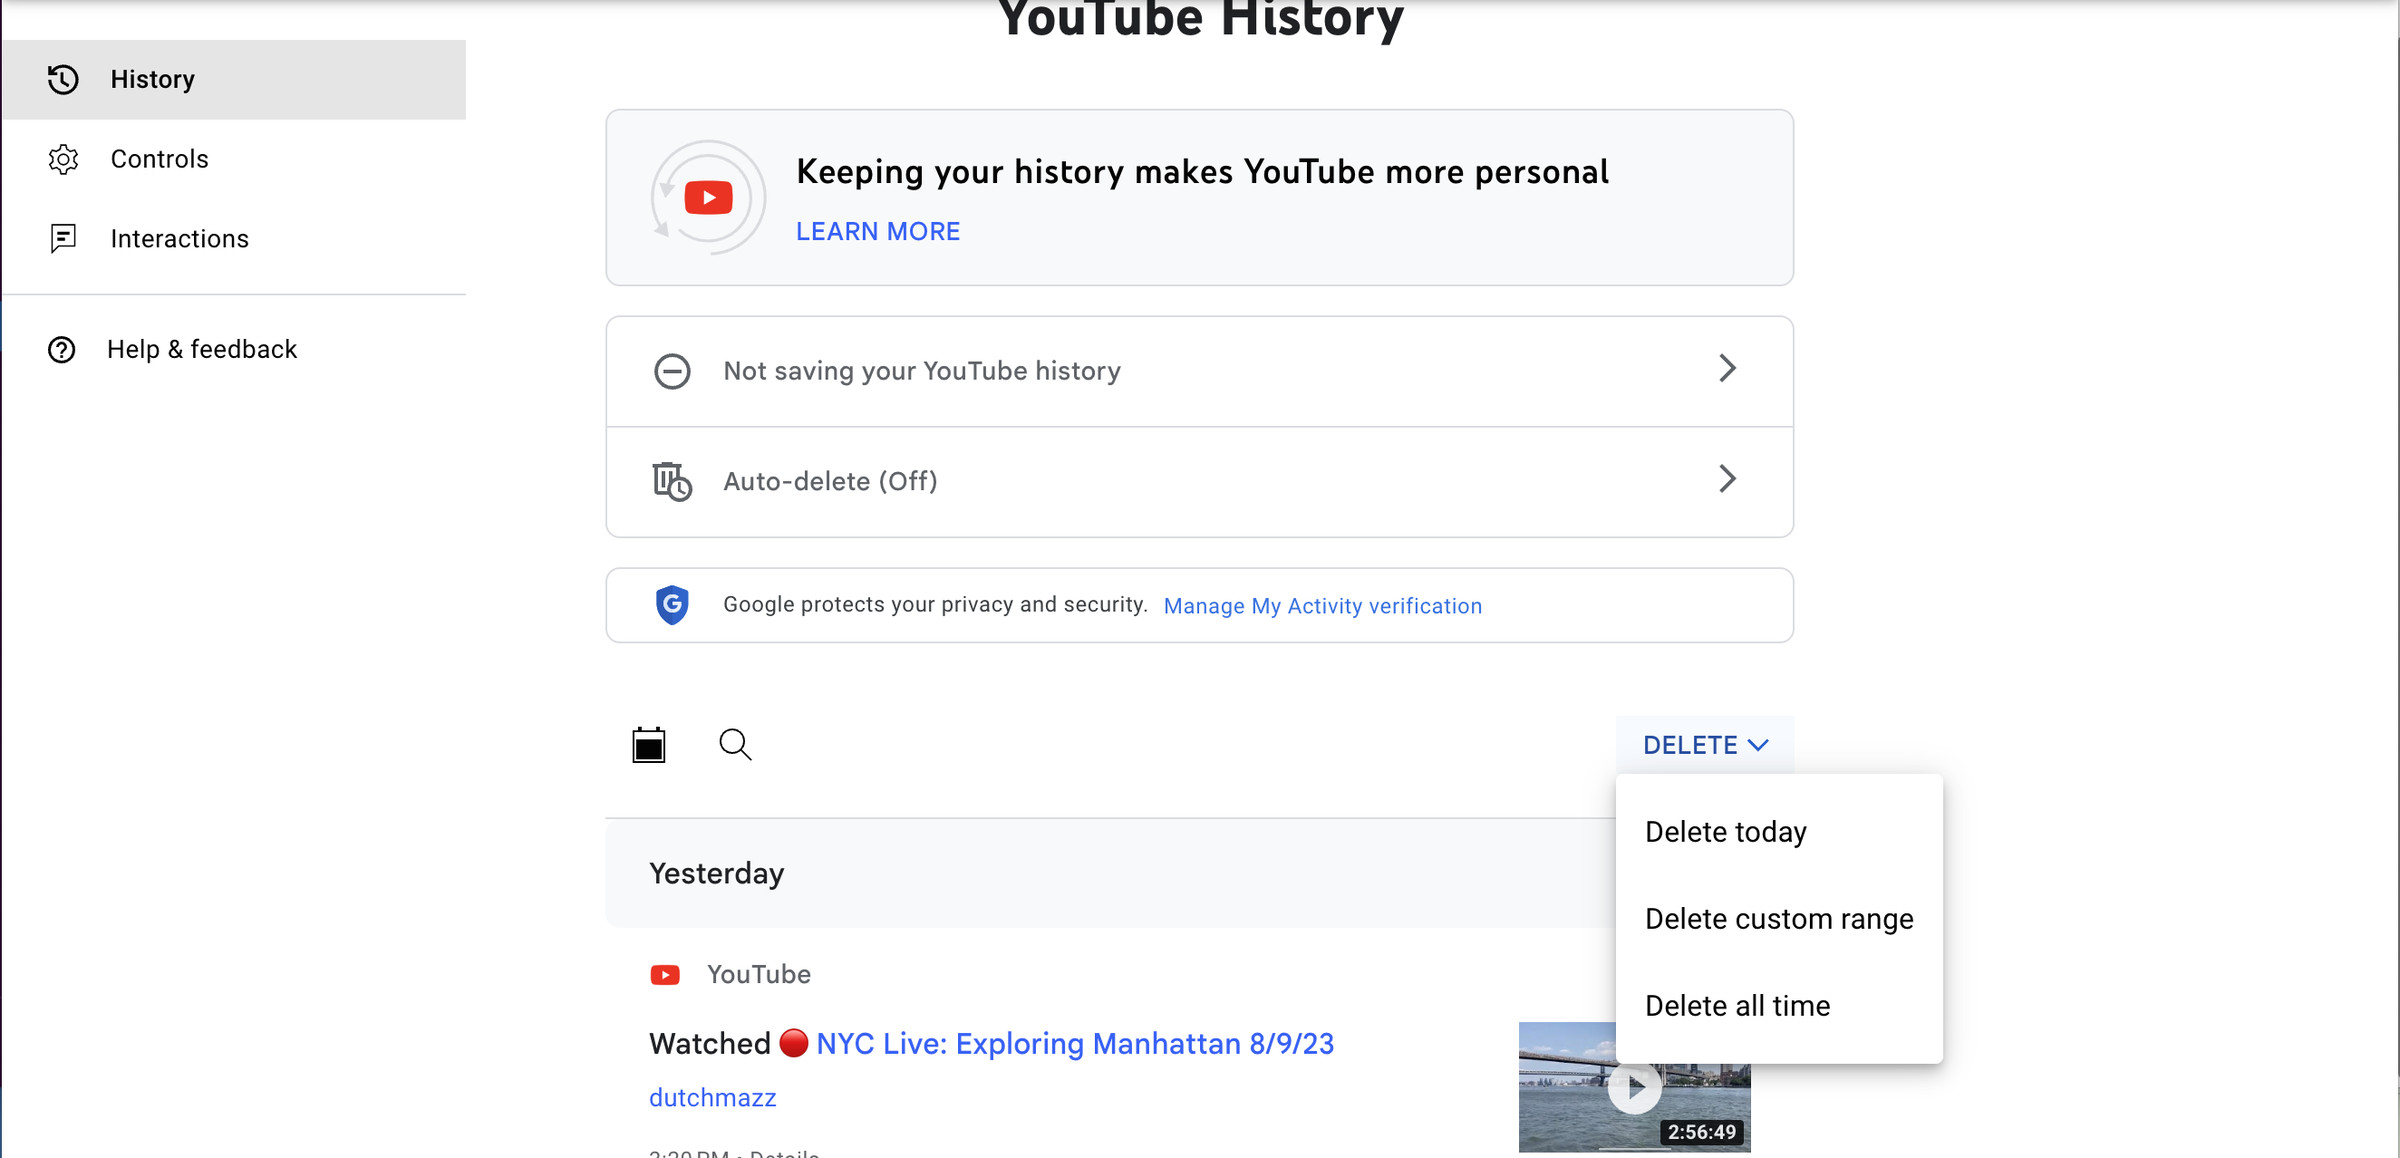 Page with YouTube History on top, a menu at left, several choices, and a Delete button near the center with a drop-down menu saying Delete today, Delete custom range, Delete all time.